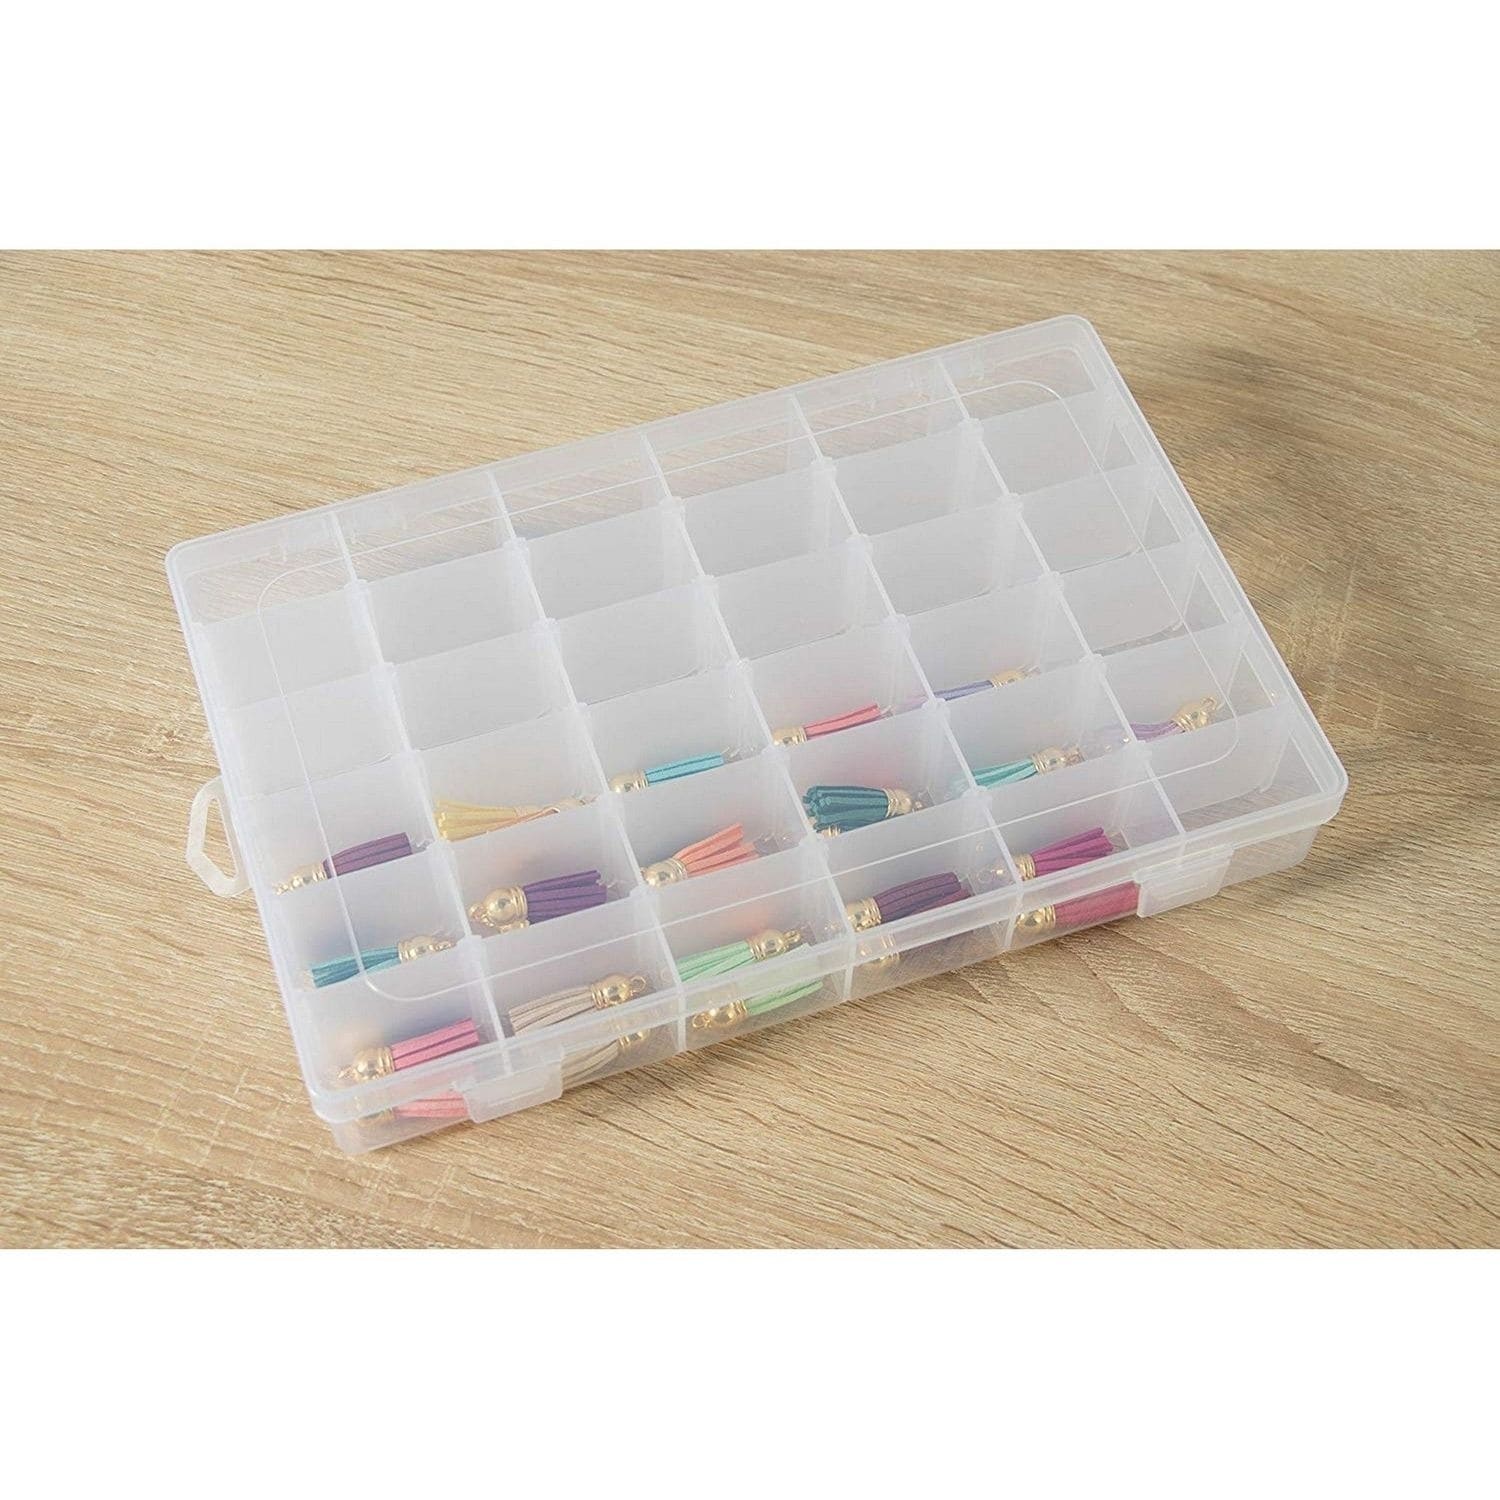 Juvale 3 Pack Jewelry Organizer Box for Earrings Storage, Clear Plastic  Bead Storage Containers for Crafts, 36 Grids Each